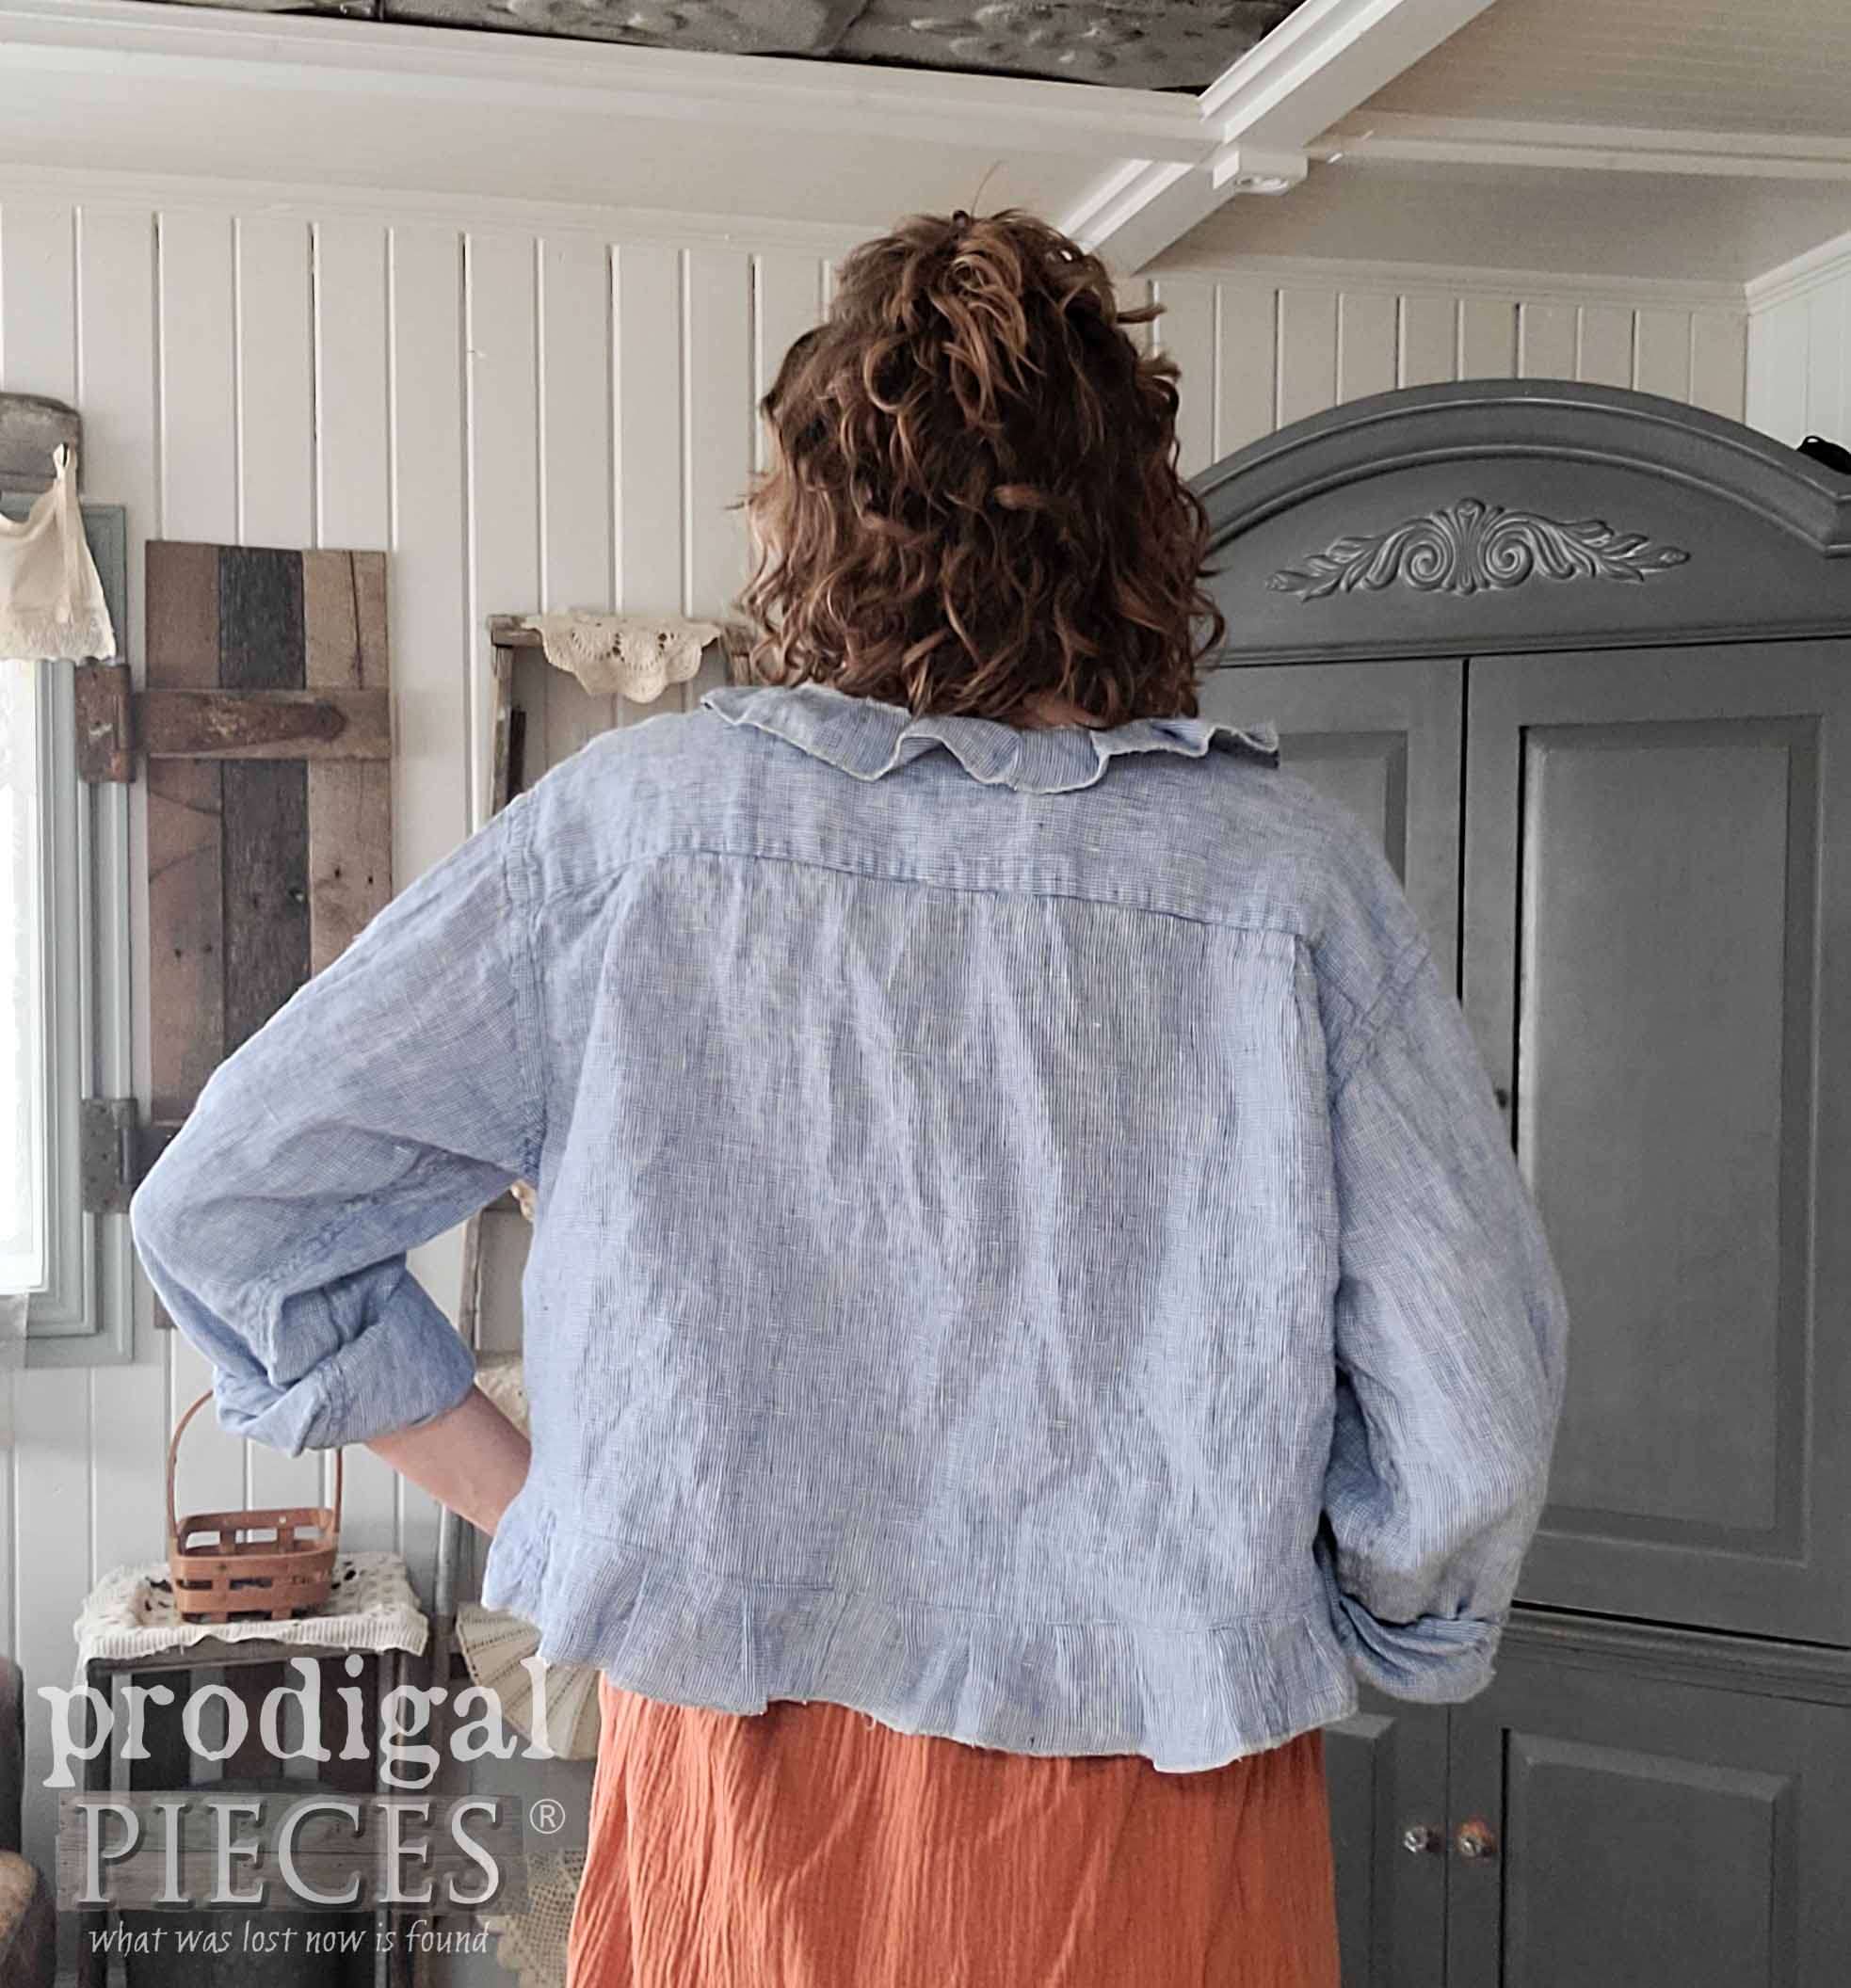 Striped Refashioned Linen Jacket from Thrifted Shirt by Larissa of Prodigal Pieces | prodigalpieces.com #prodigalpieces #refashion #diy #upcycled